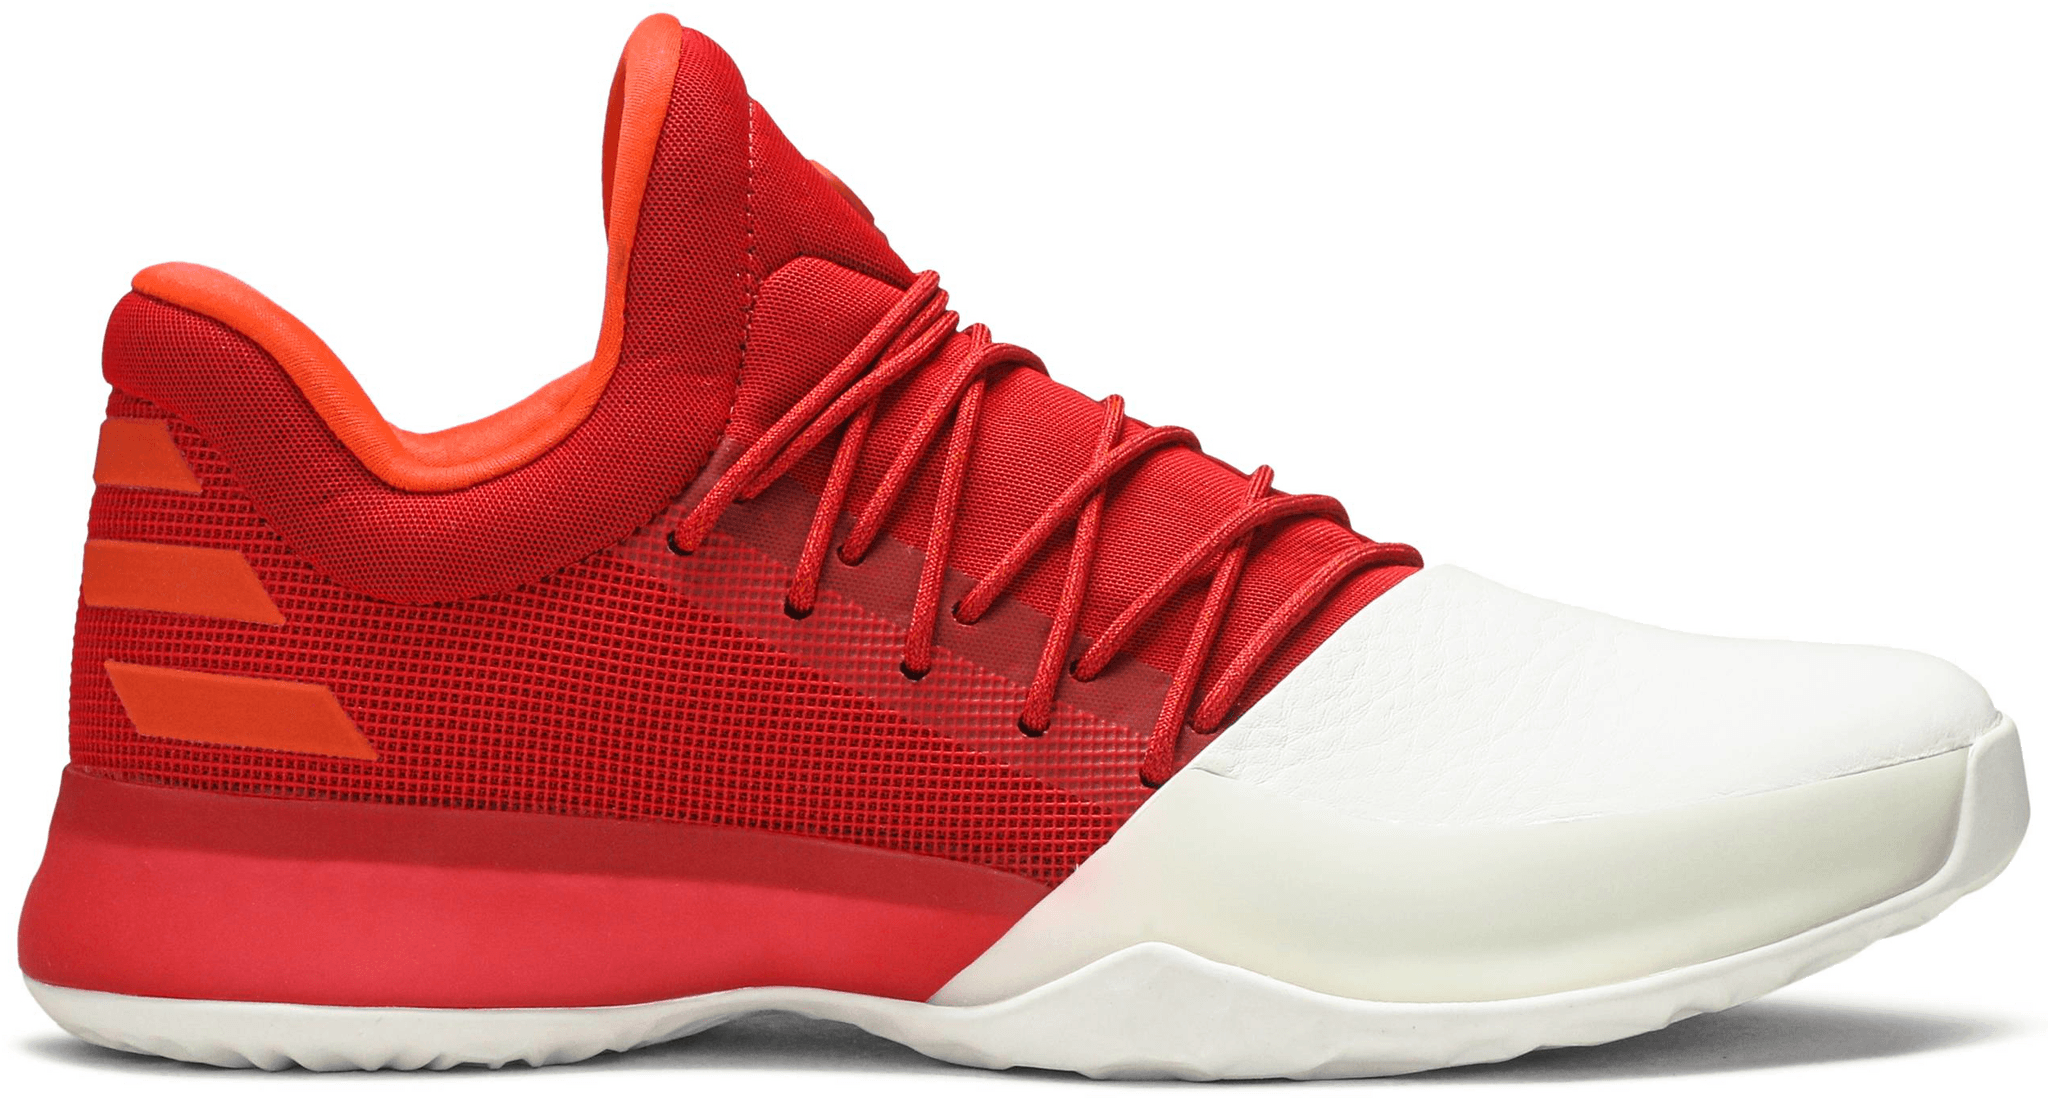 Adidas Harden Volume 1 - Review, Deals, Pics of 13 Colorways